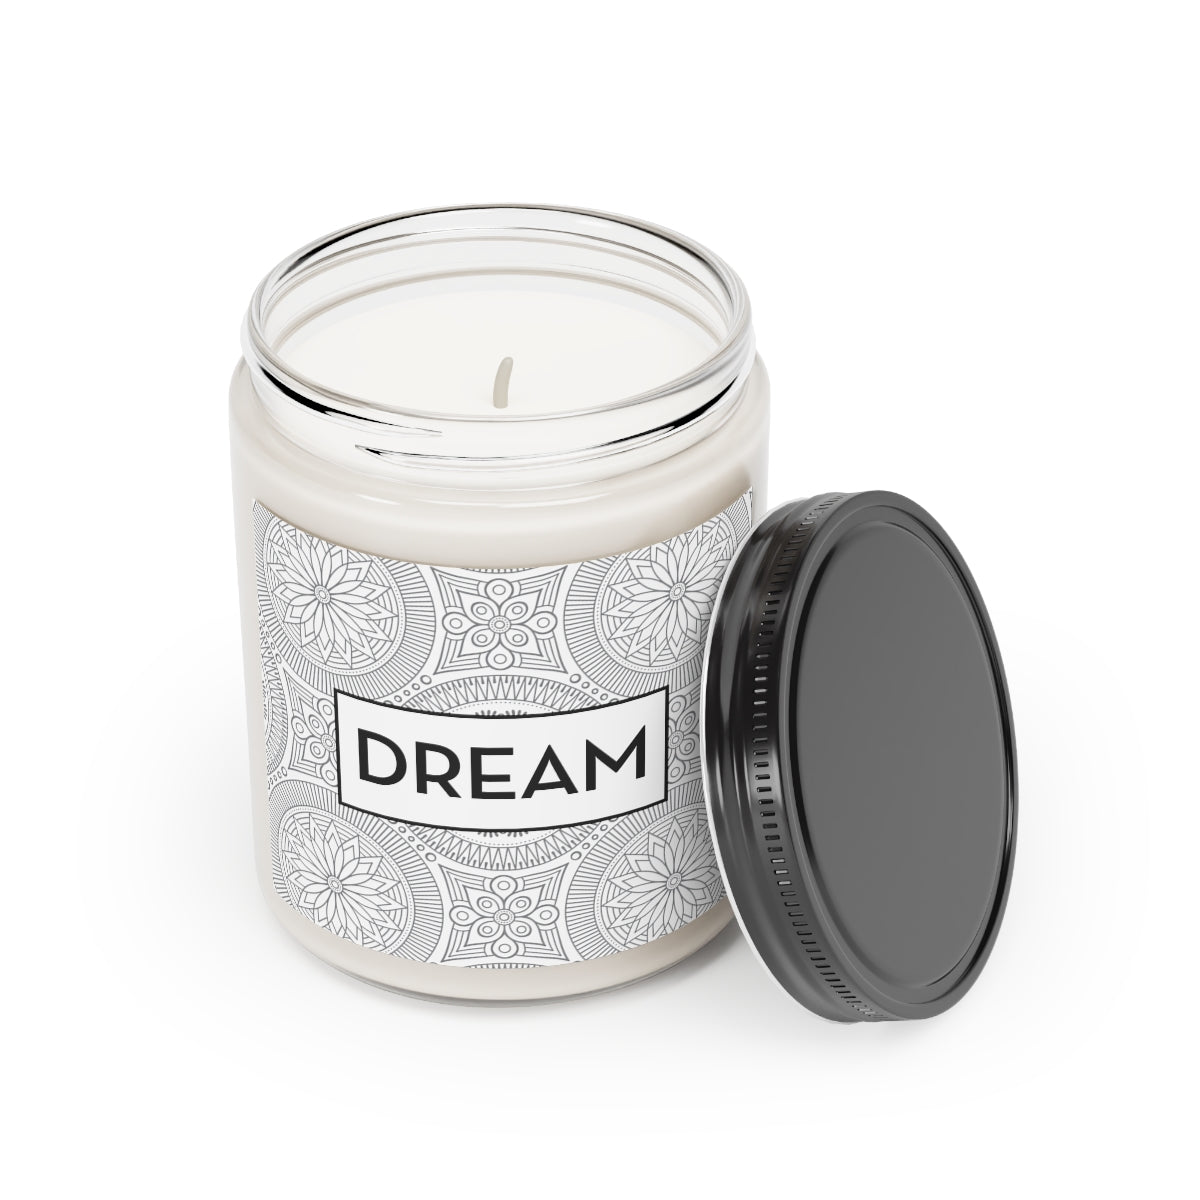 DREAM Vegan Soy Scented Candle, 9oz